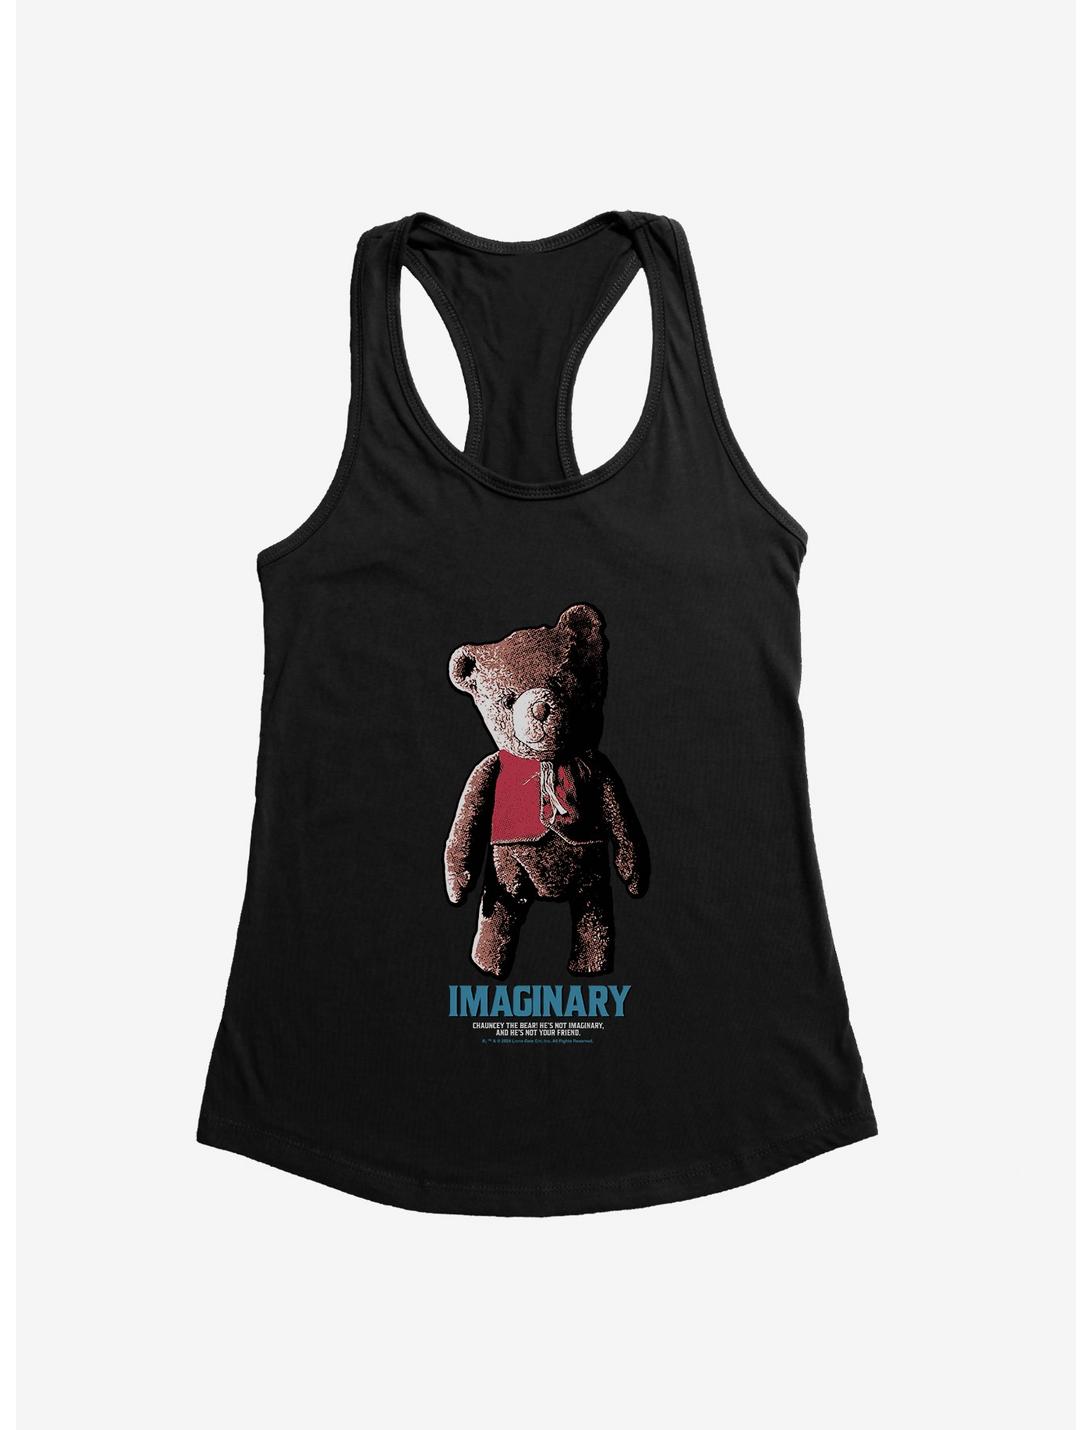 Imaginary Chauncey The Bear Not Your Friend Girls Tank, BLACK, hi-res